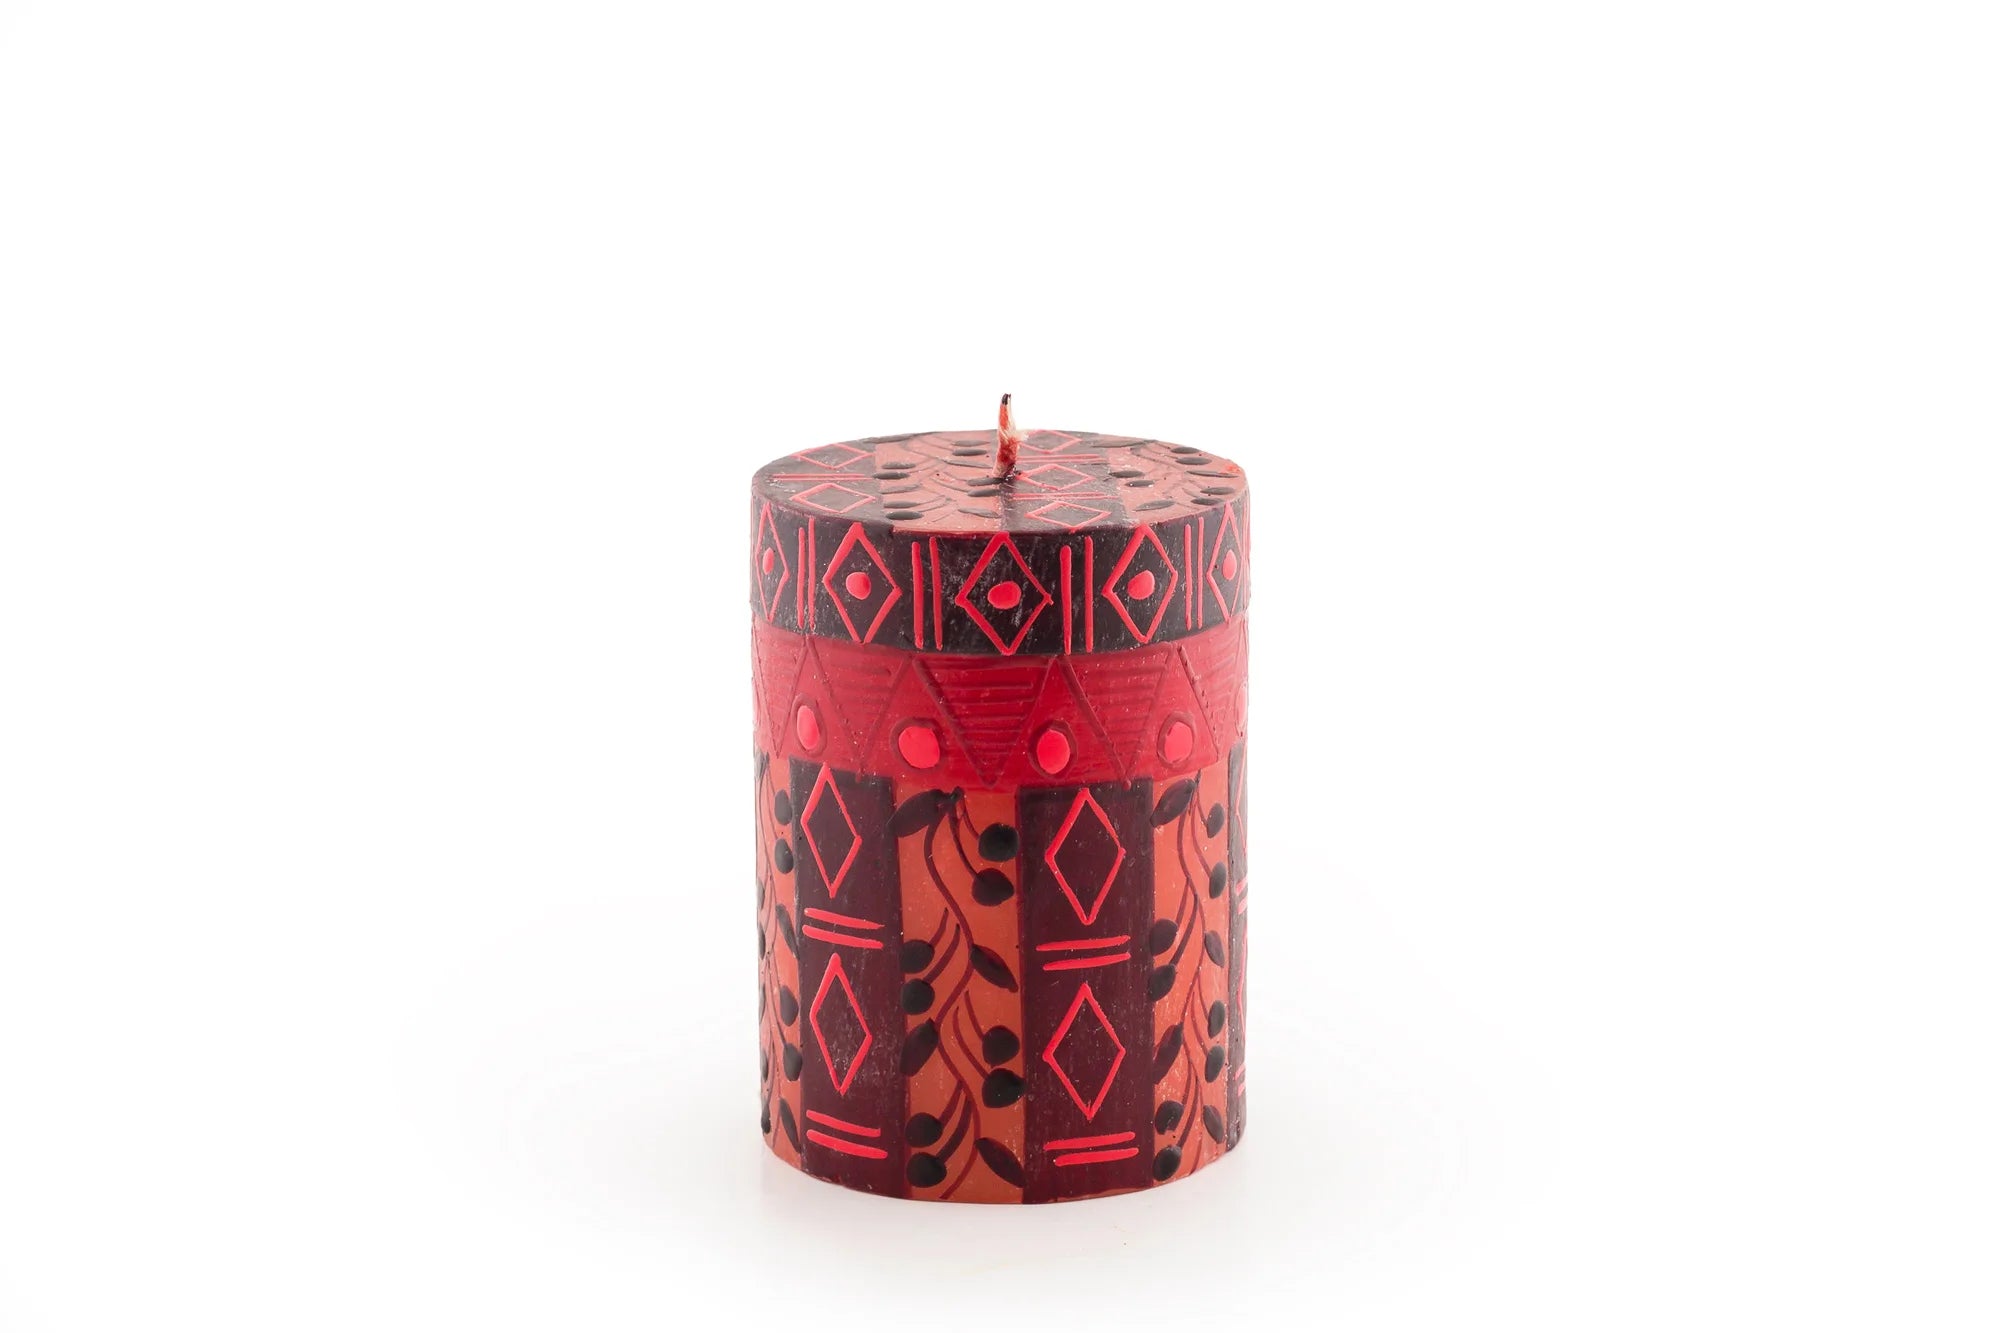 3" x 4" Berry Blaze pillar candle. Bright red with darker berry design mixed with geometric design.